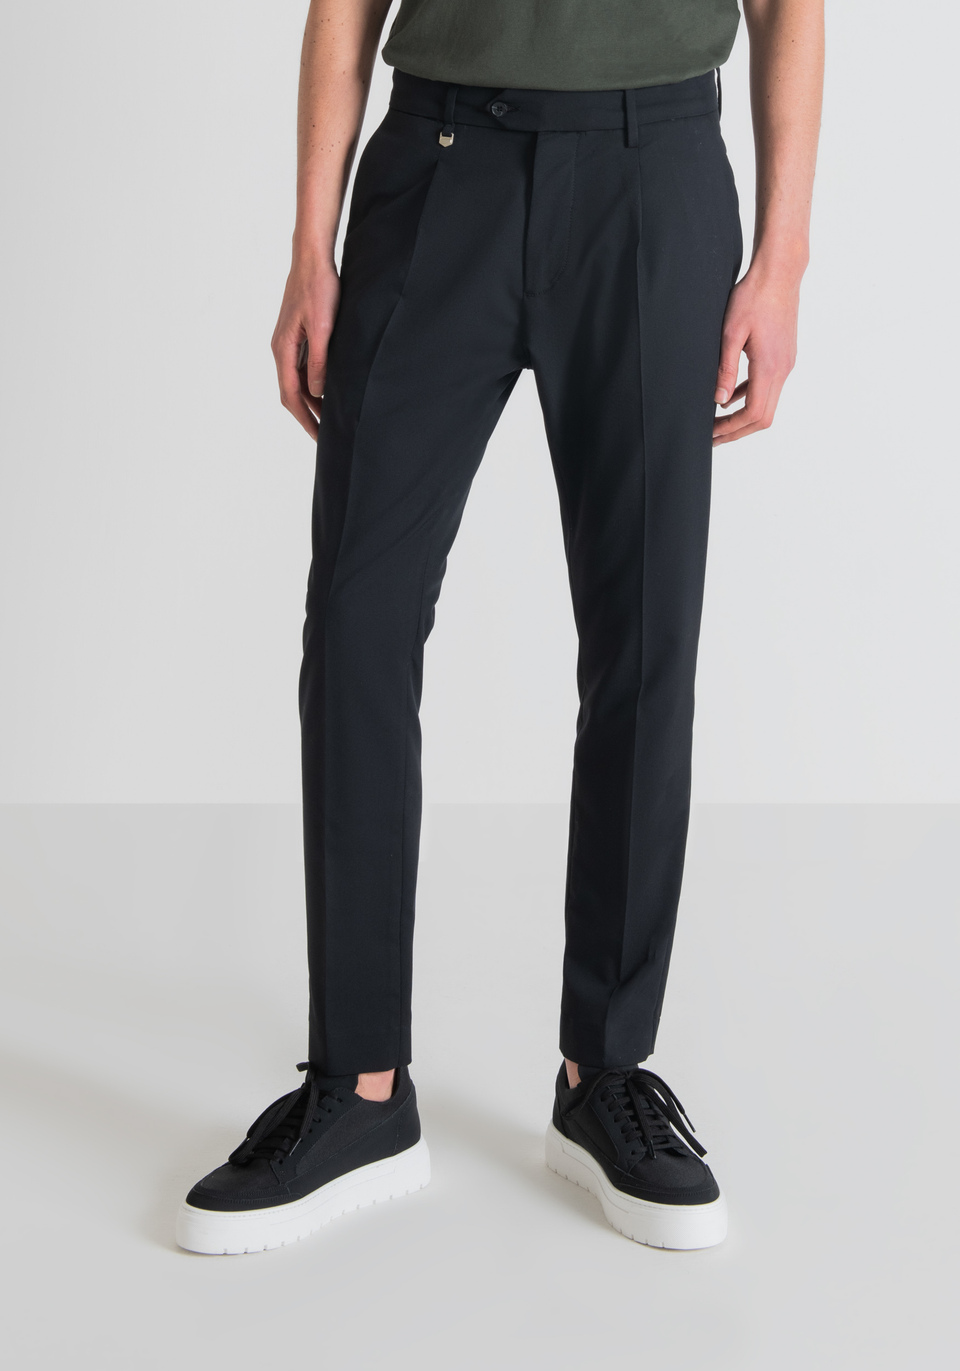 “QUENTIN” CARROT-FIT TROUSERS - Antony Morato Online Shop